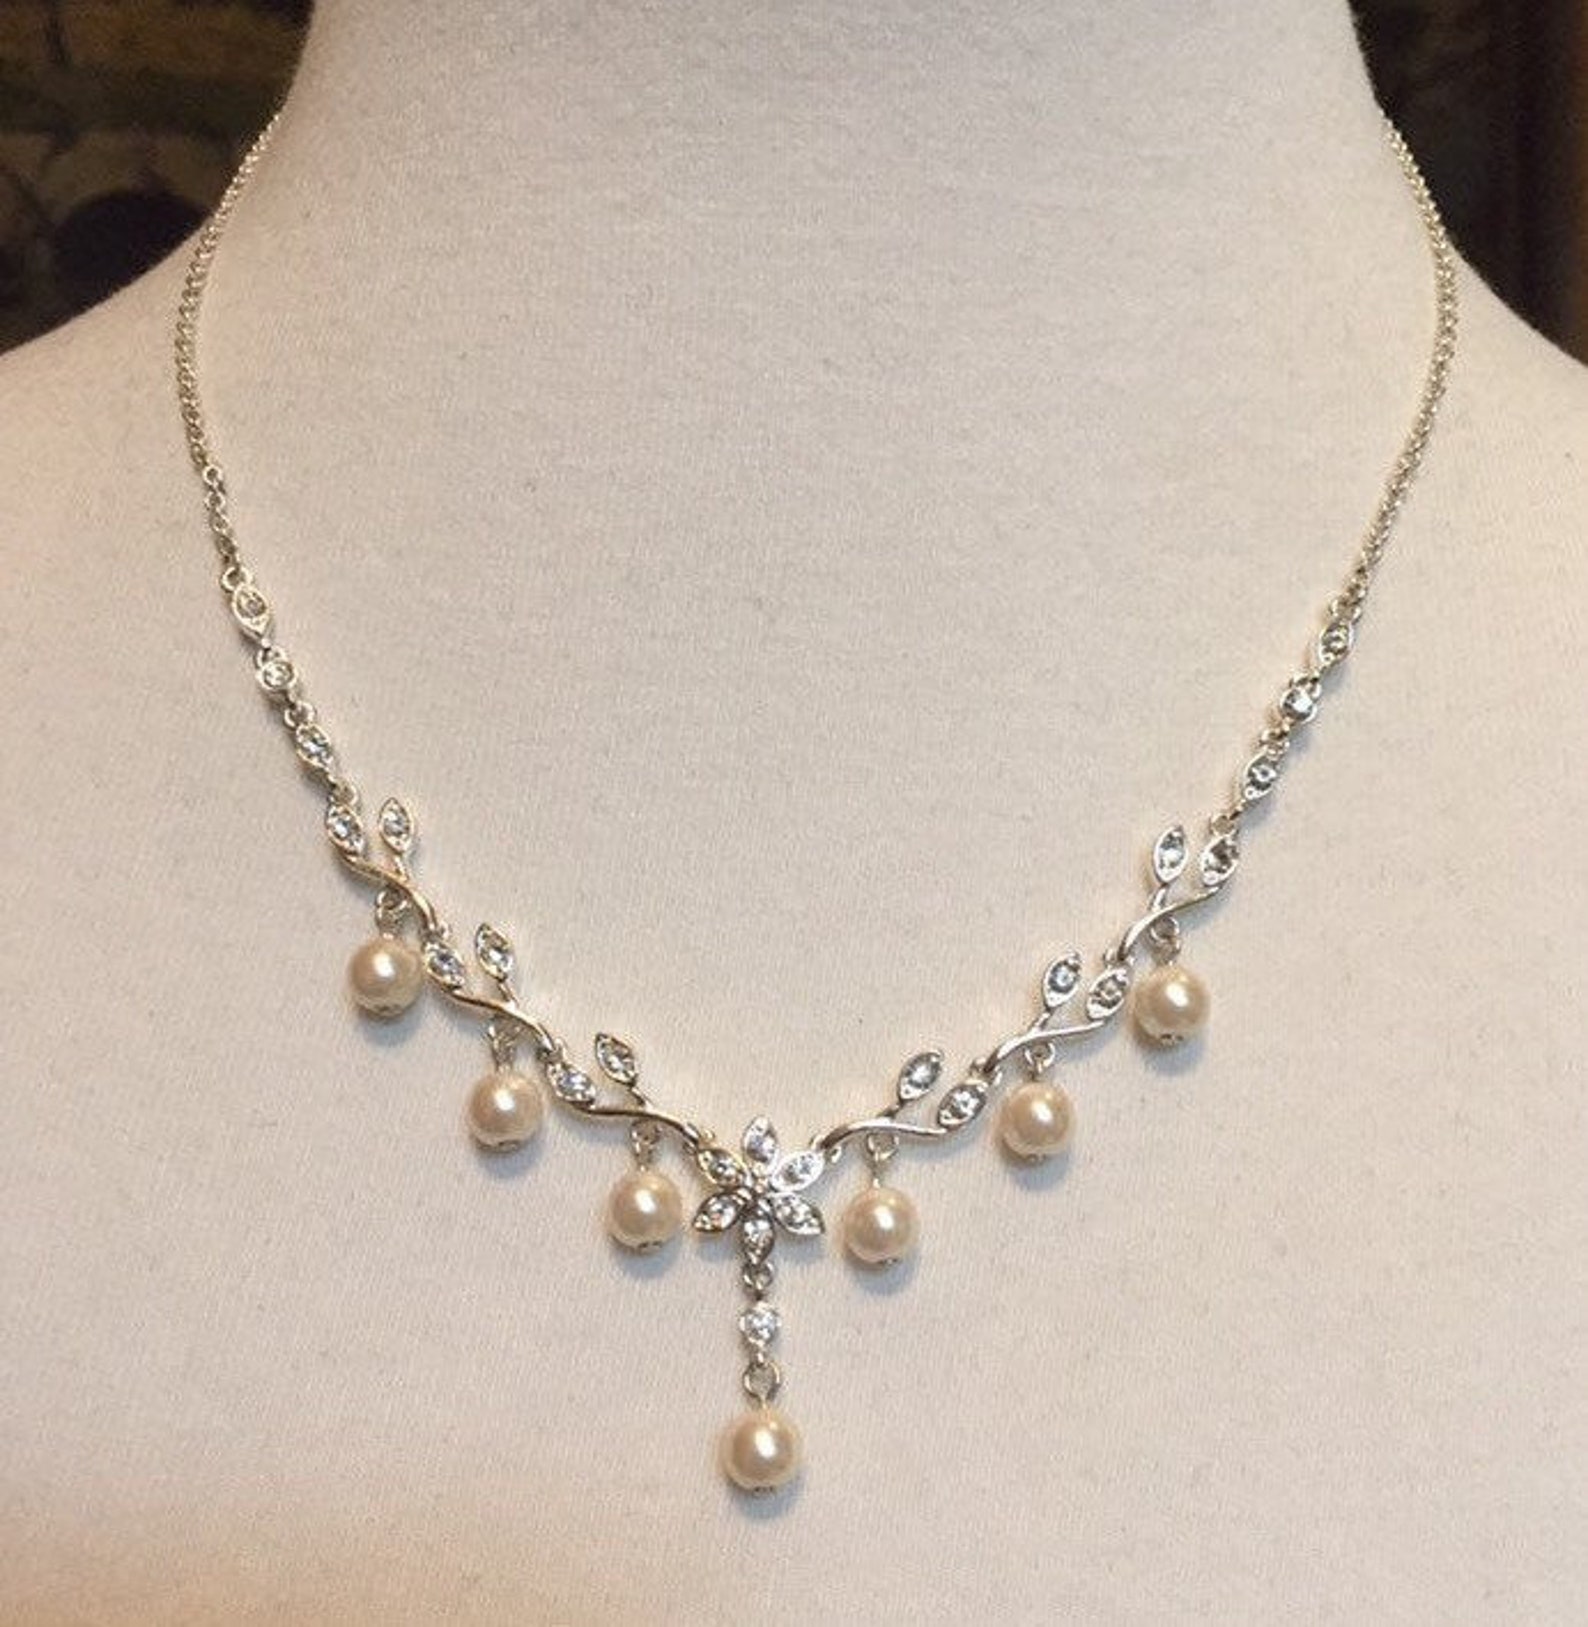 Premier Designs Silver Tone Necklace with Rhinestones and Faux | Etsy